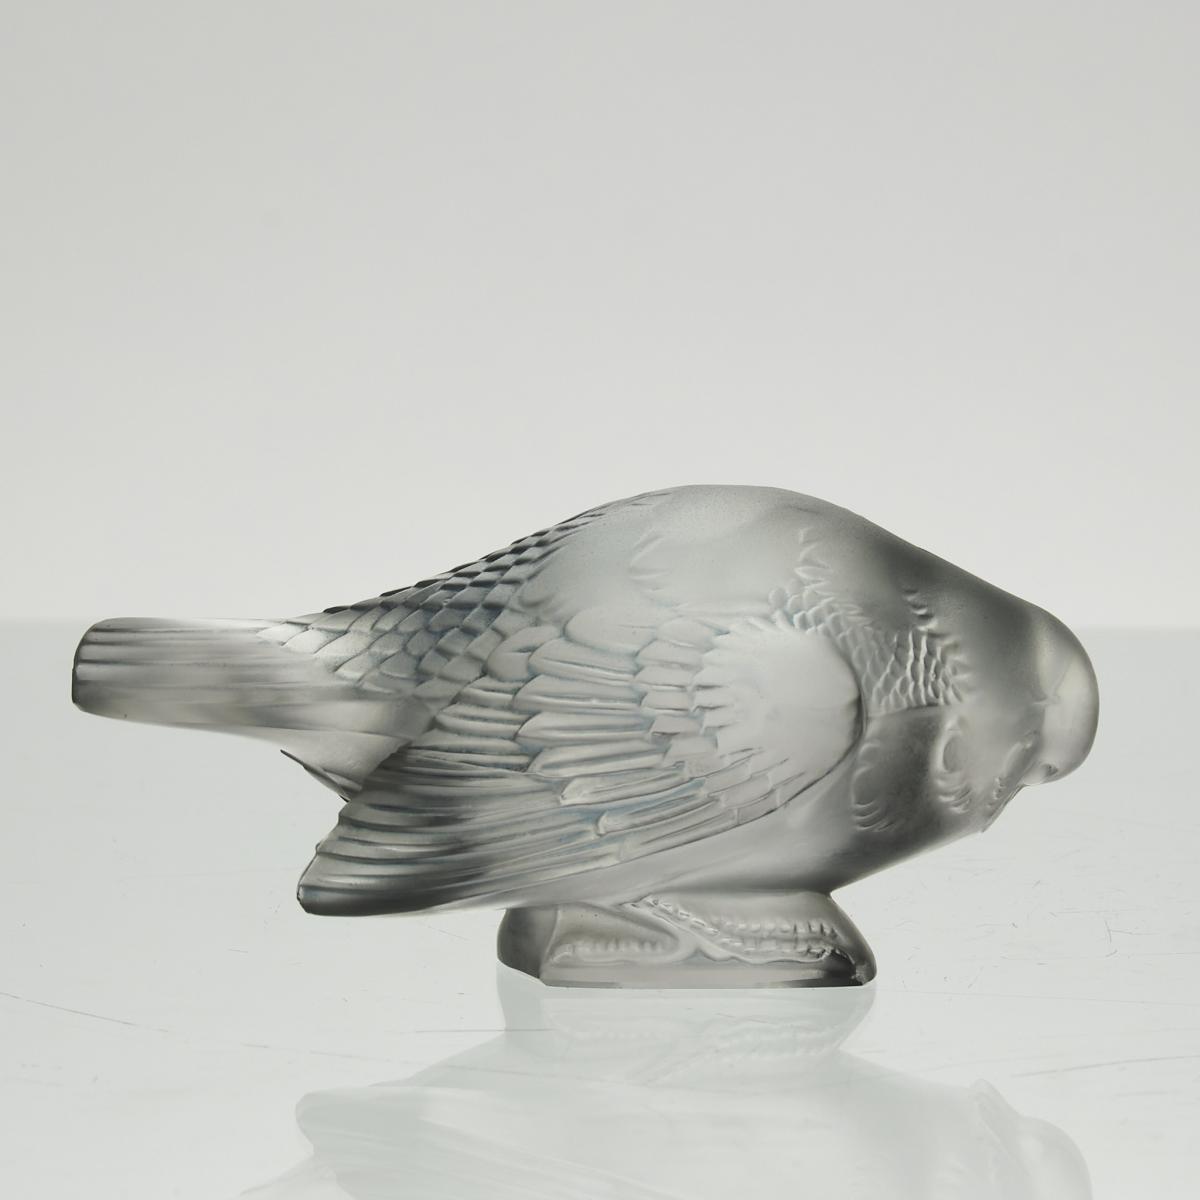 Early 20th Century Glass Sculpture entitled "Moineau Sournois" by Rene Lalique